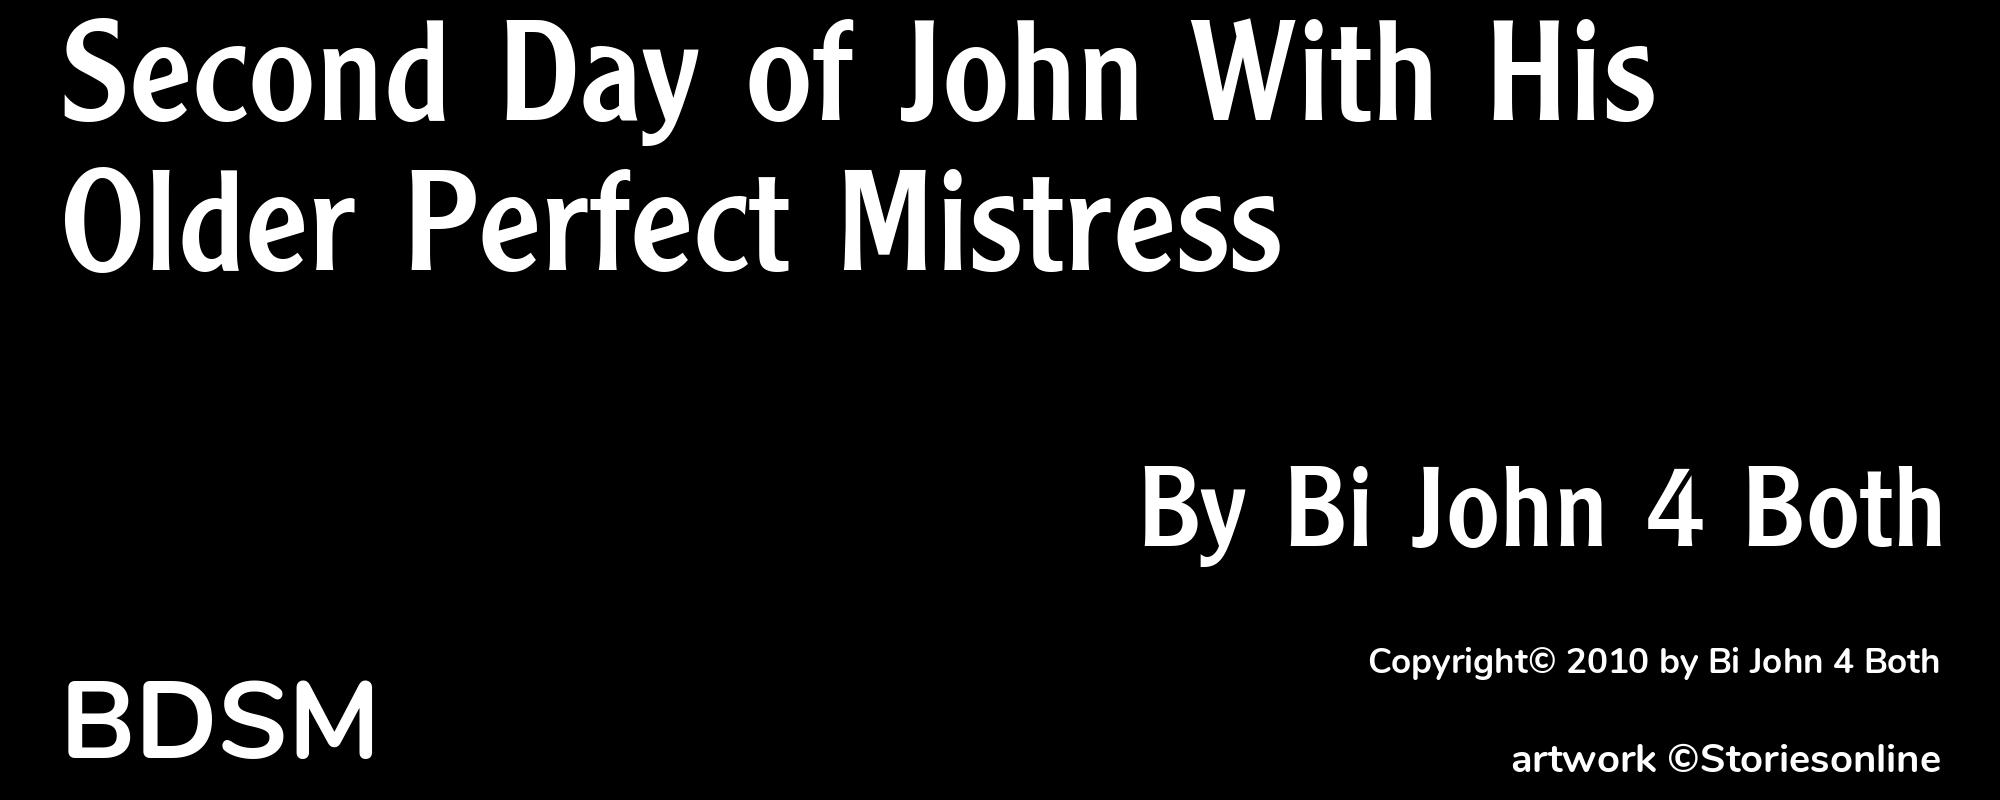 Second Day of John With His Older Perfect Mistress - Cover